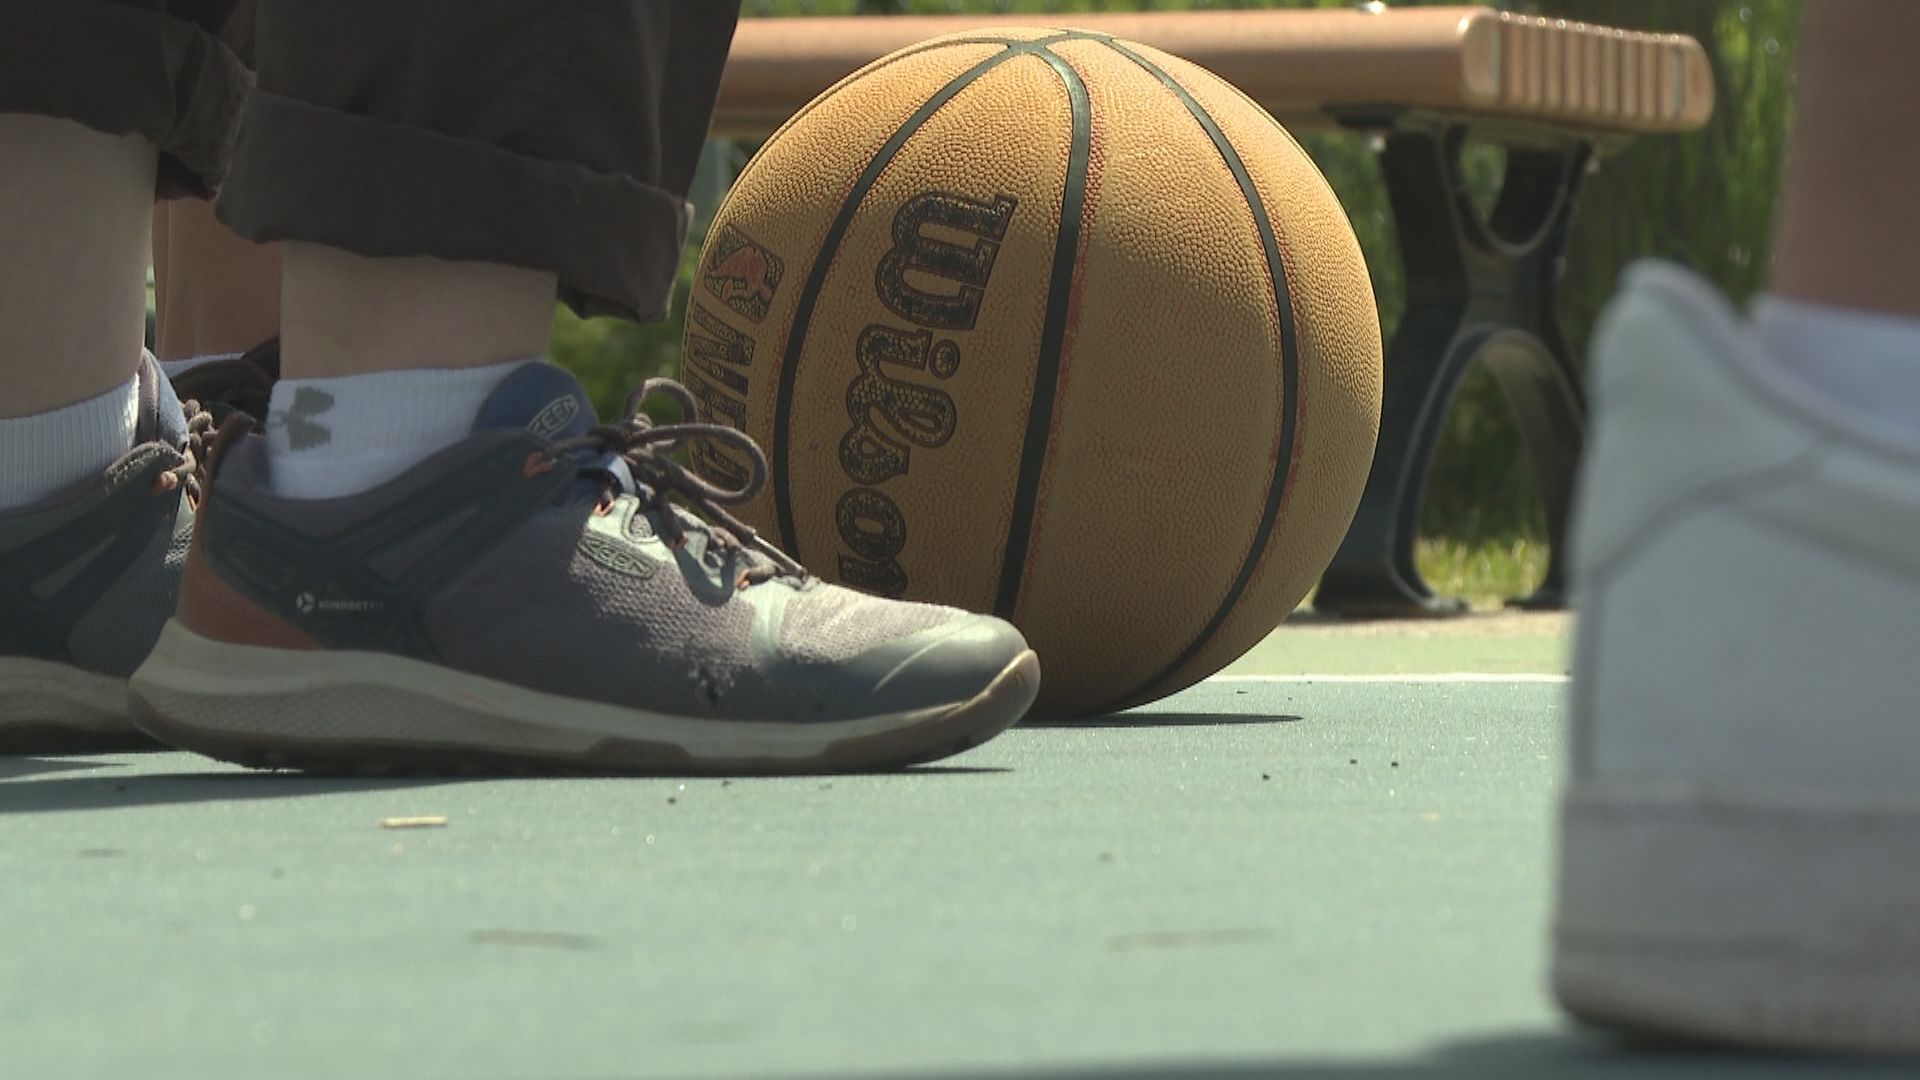 Montreal community raises funds for youth sports